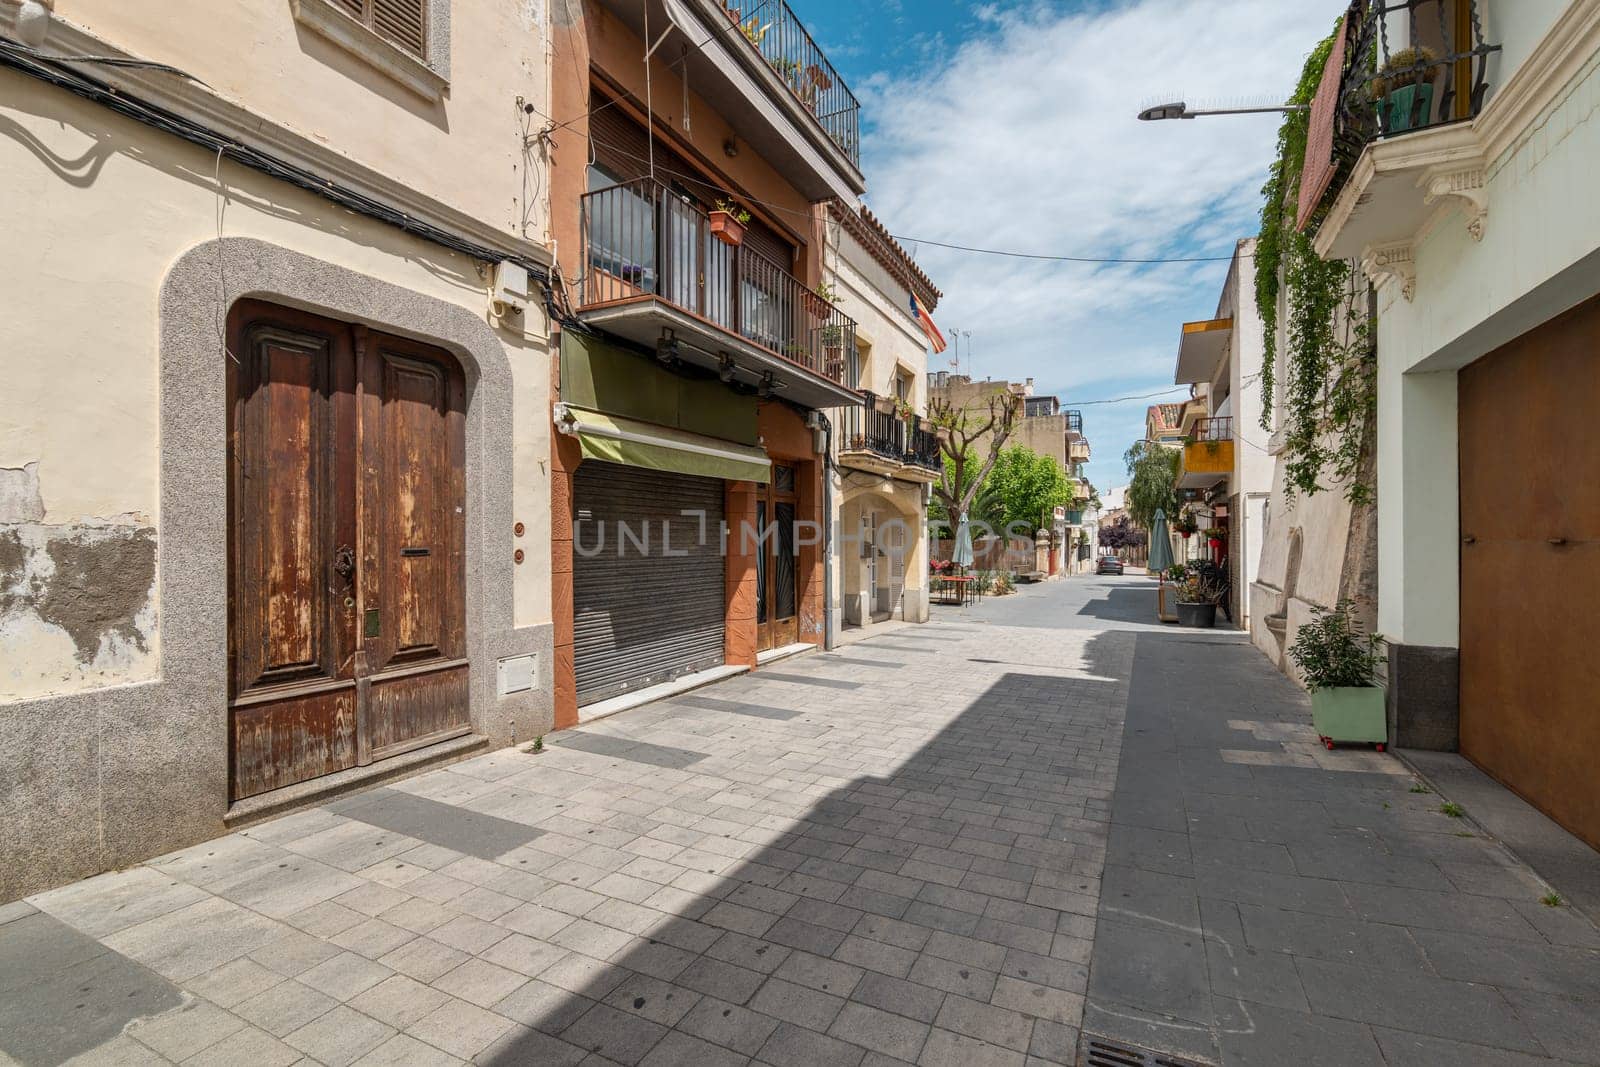 Narrow paved street with old low buildings in Vilassar de Mar town. Historic center architecture of popular Catalonian resort. Travel on holiday